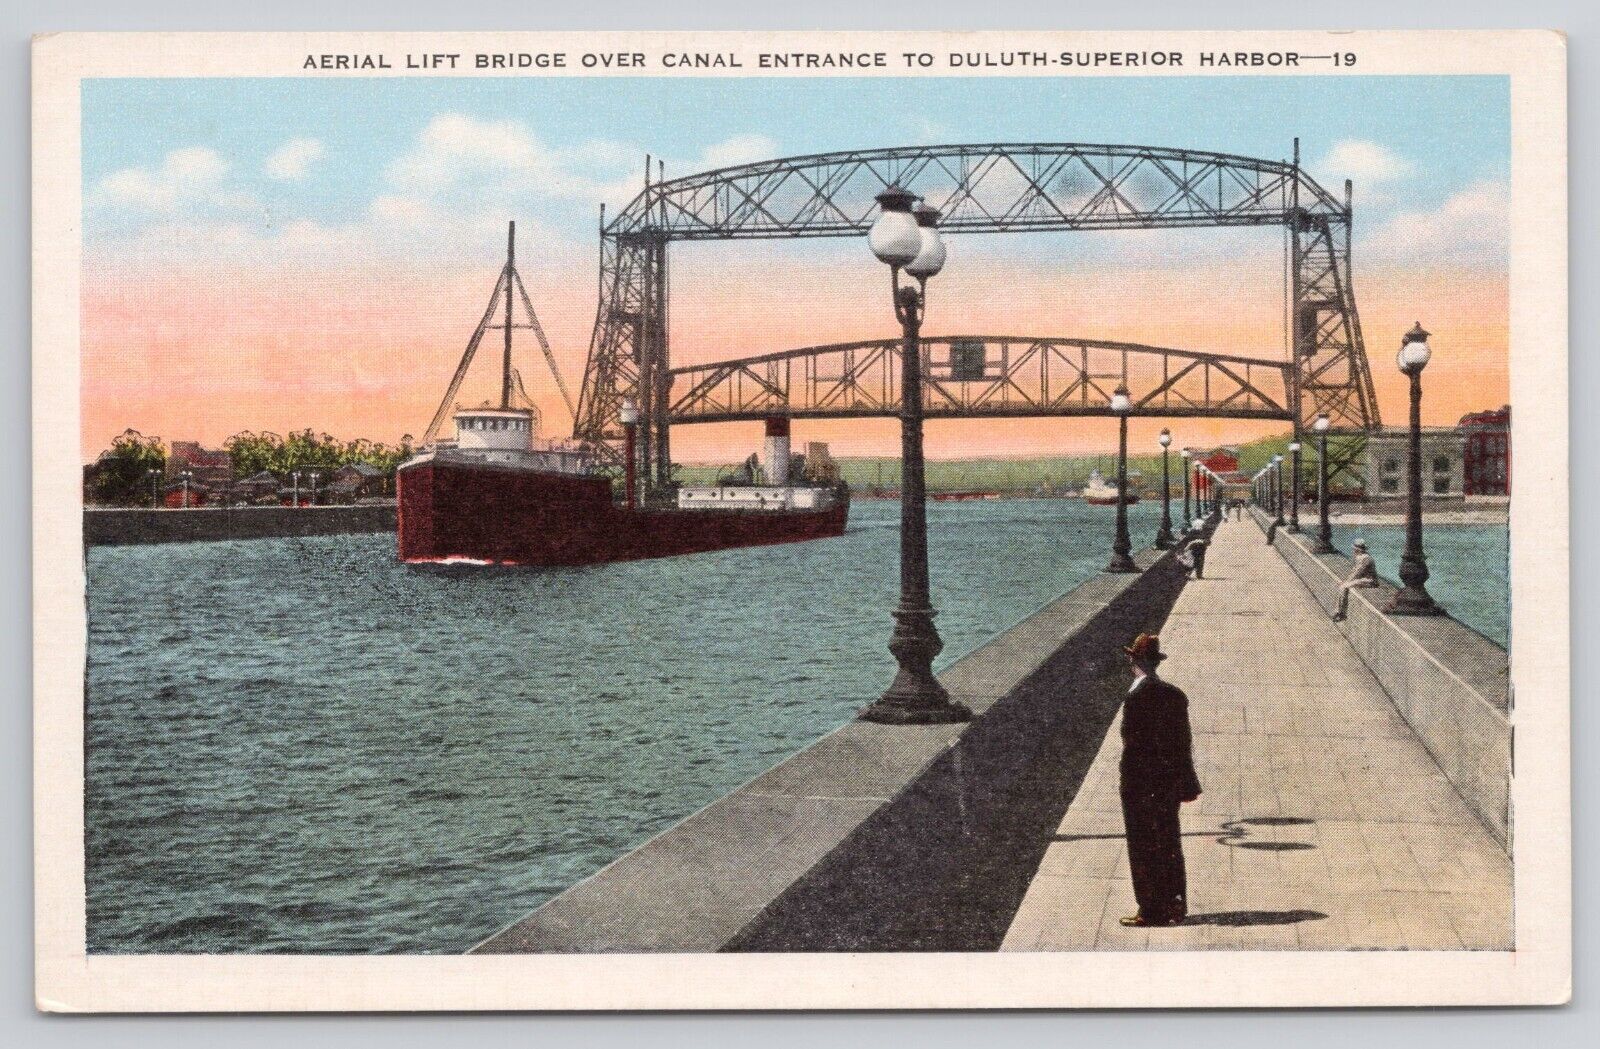 Duluth MN Aerial Lift Bridge Over Canal Entry to Duluth-Superior Harbor Postcard